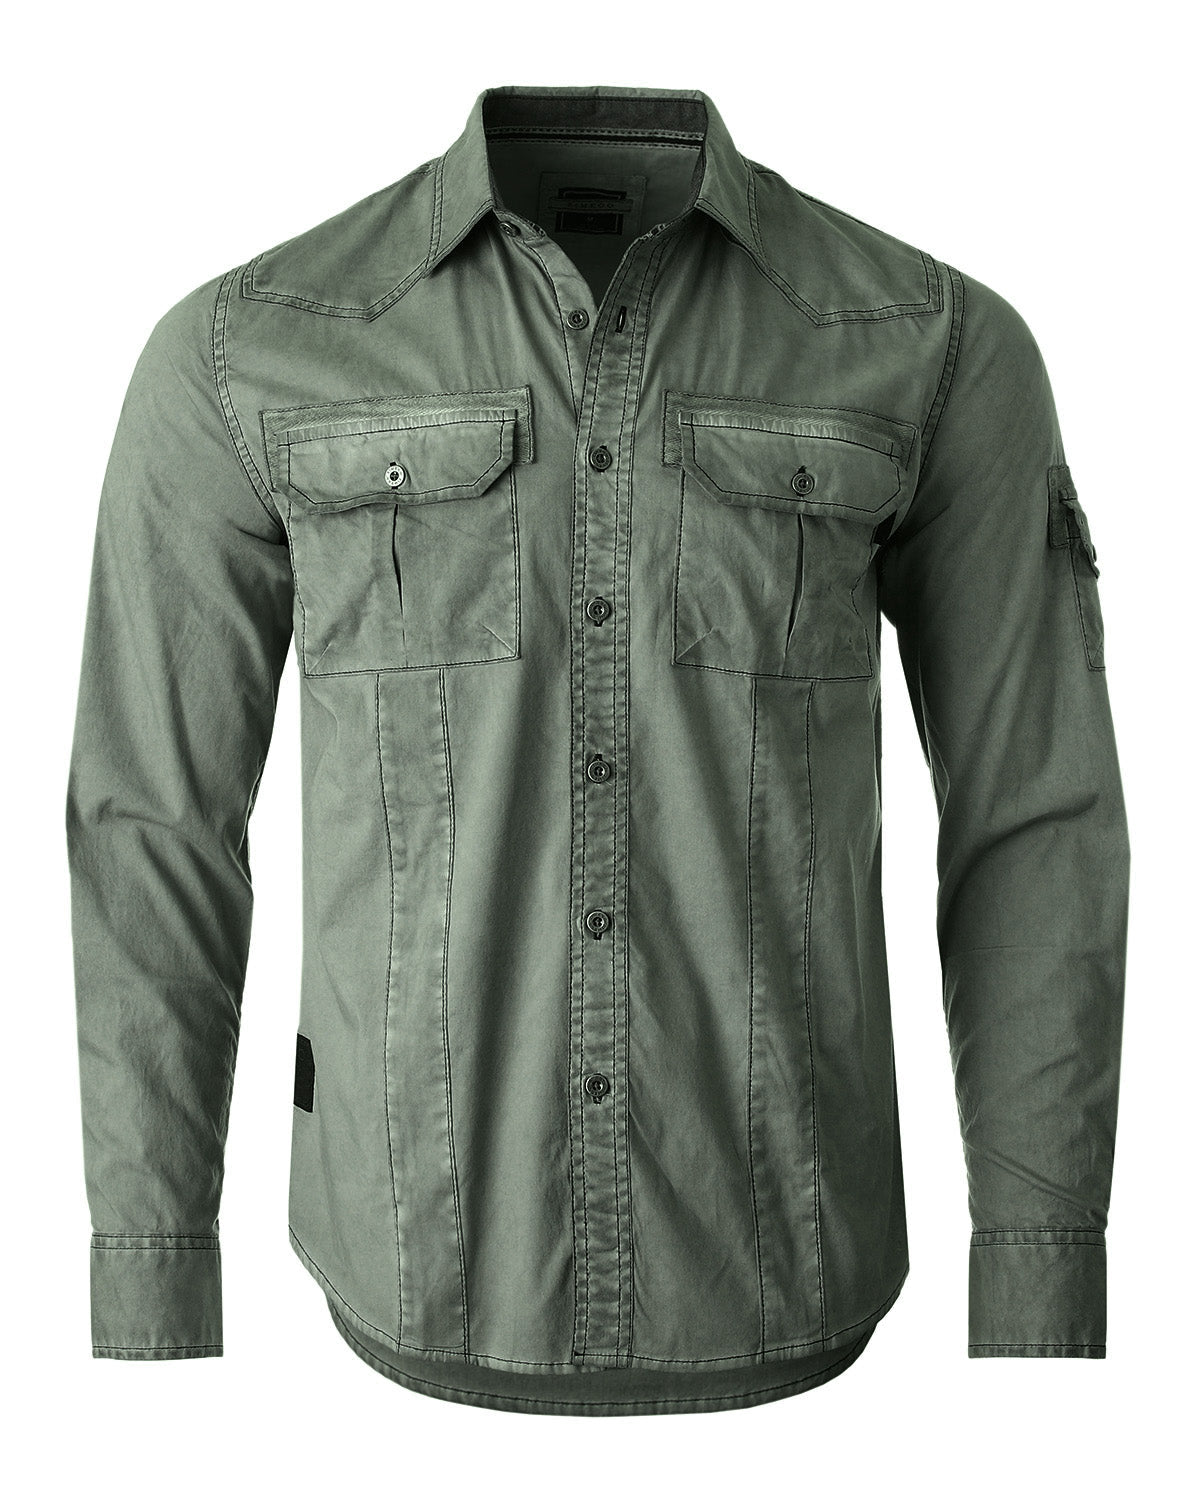 Men's Stretch Flex Slim Color Washed Vintage Rugged Button Shirt Army Green